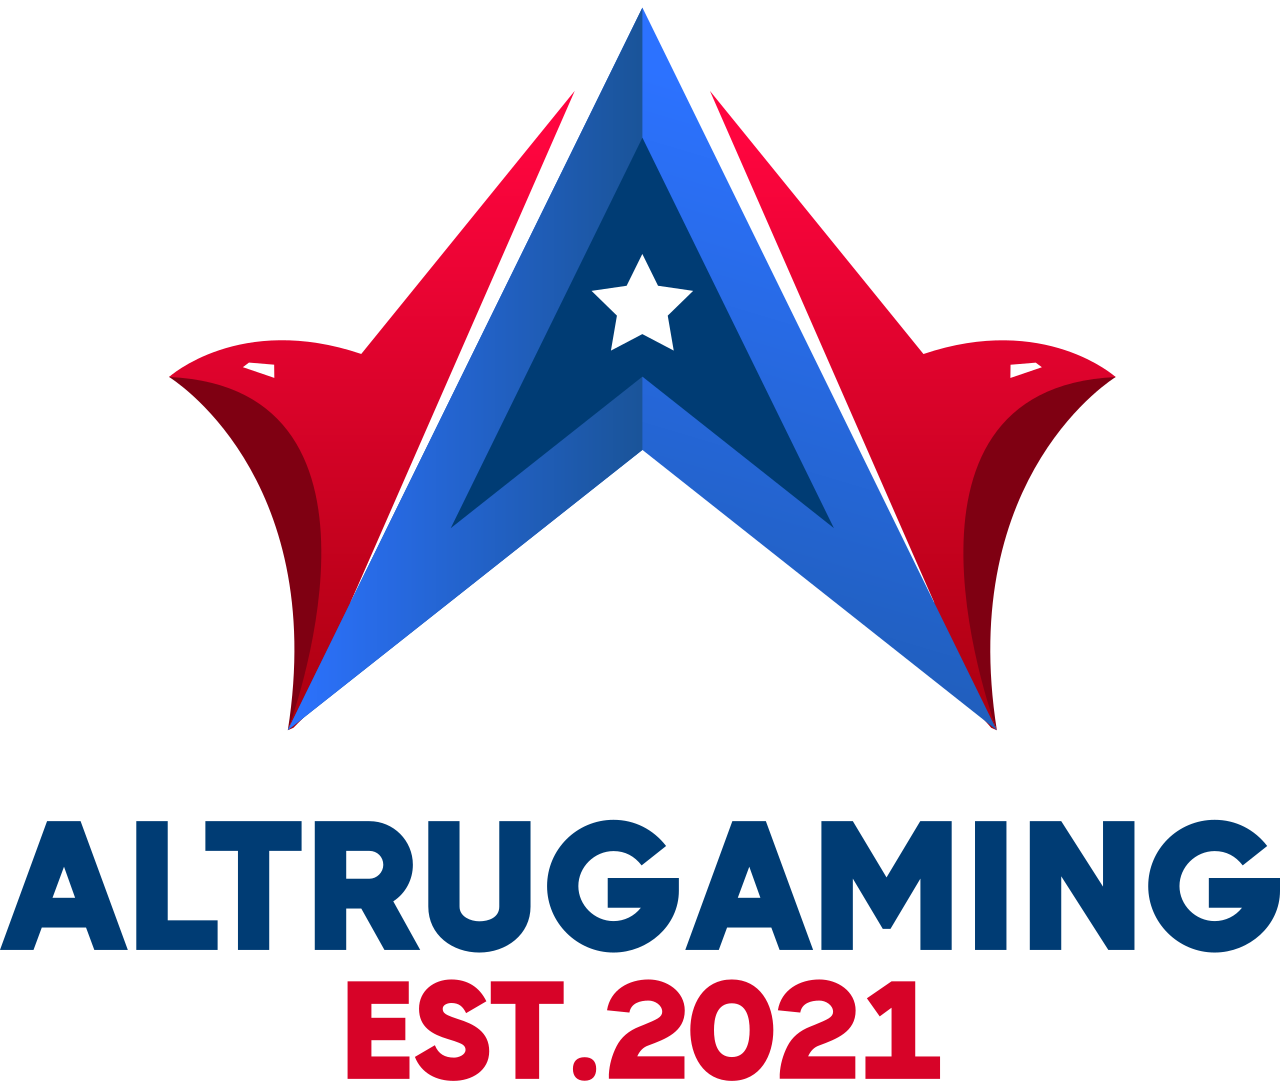 AltruGaming's web page